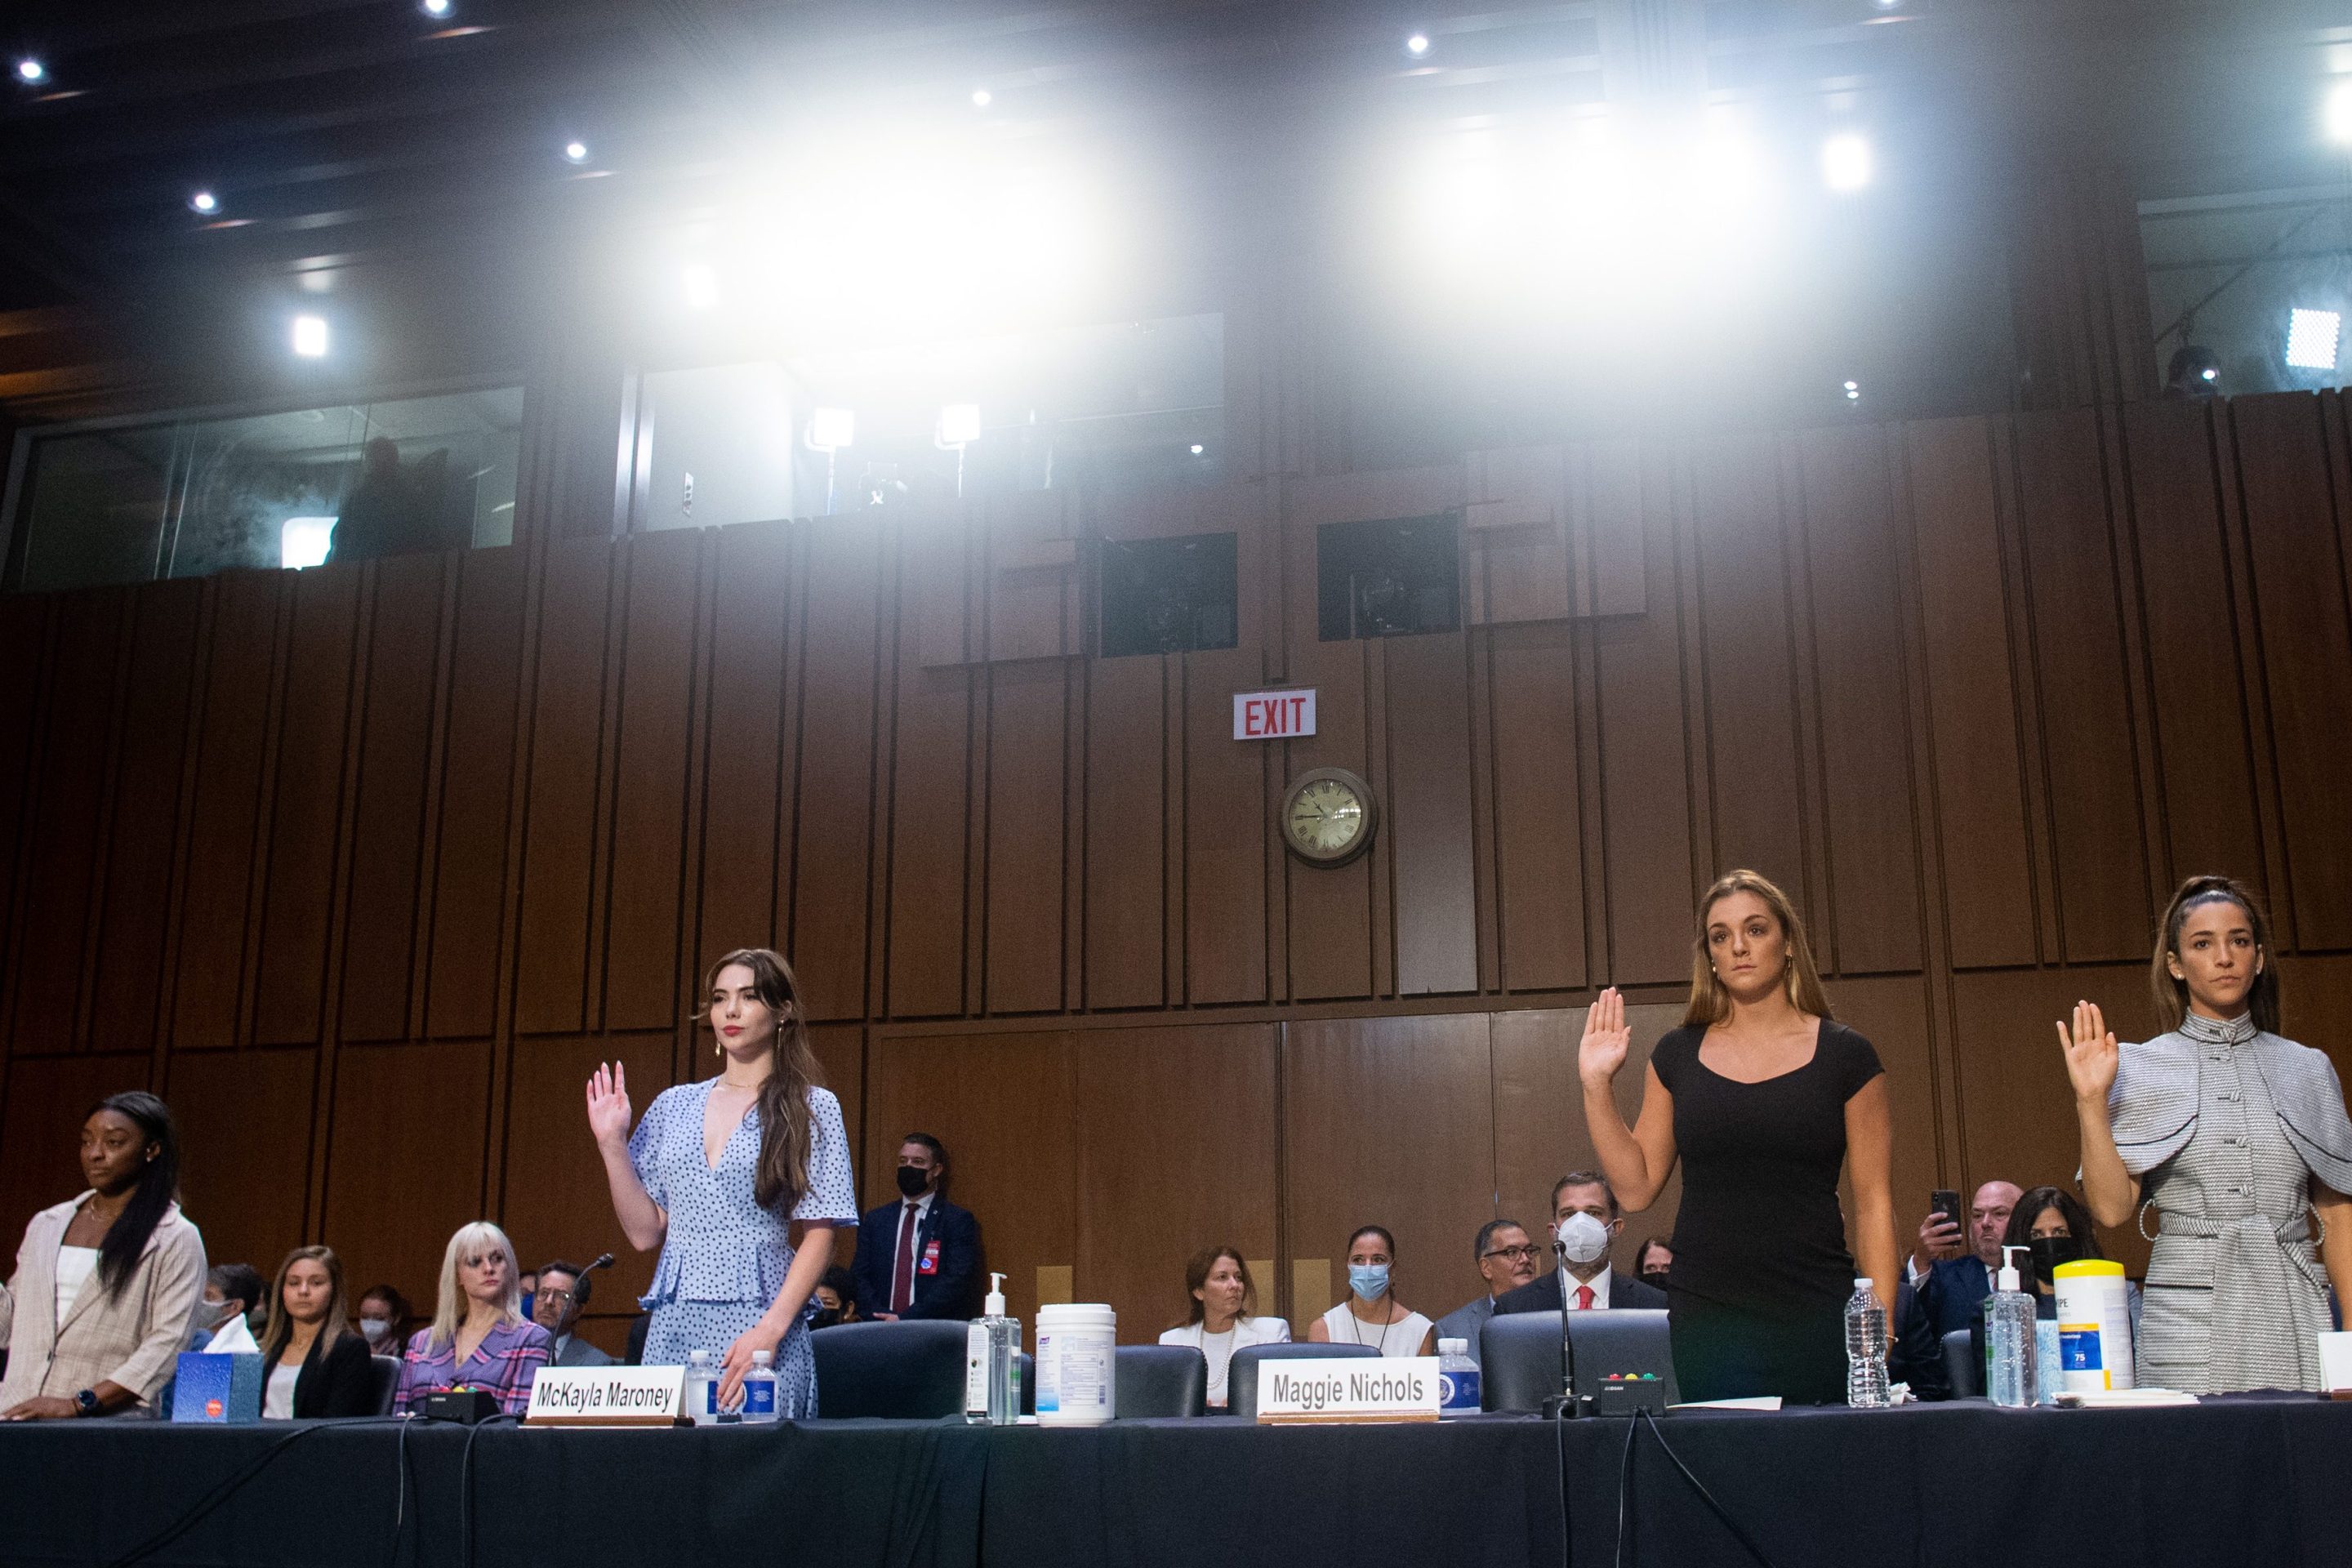 U.S. gymnasts Simone Biles, McKayla Maroney, Maggie Nichols and Aly Raisman are sworn in to testify during a Senate Judiciary hearing about the Inspector General's report on the FBI handling of the Larry Nassar investigation of sexual abuse of U.S. gymnasts, on Capitol Hill, September 15, 2021 in Washington, DC.